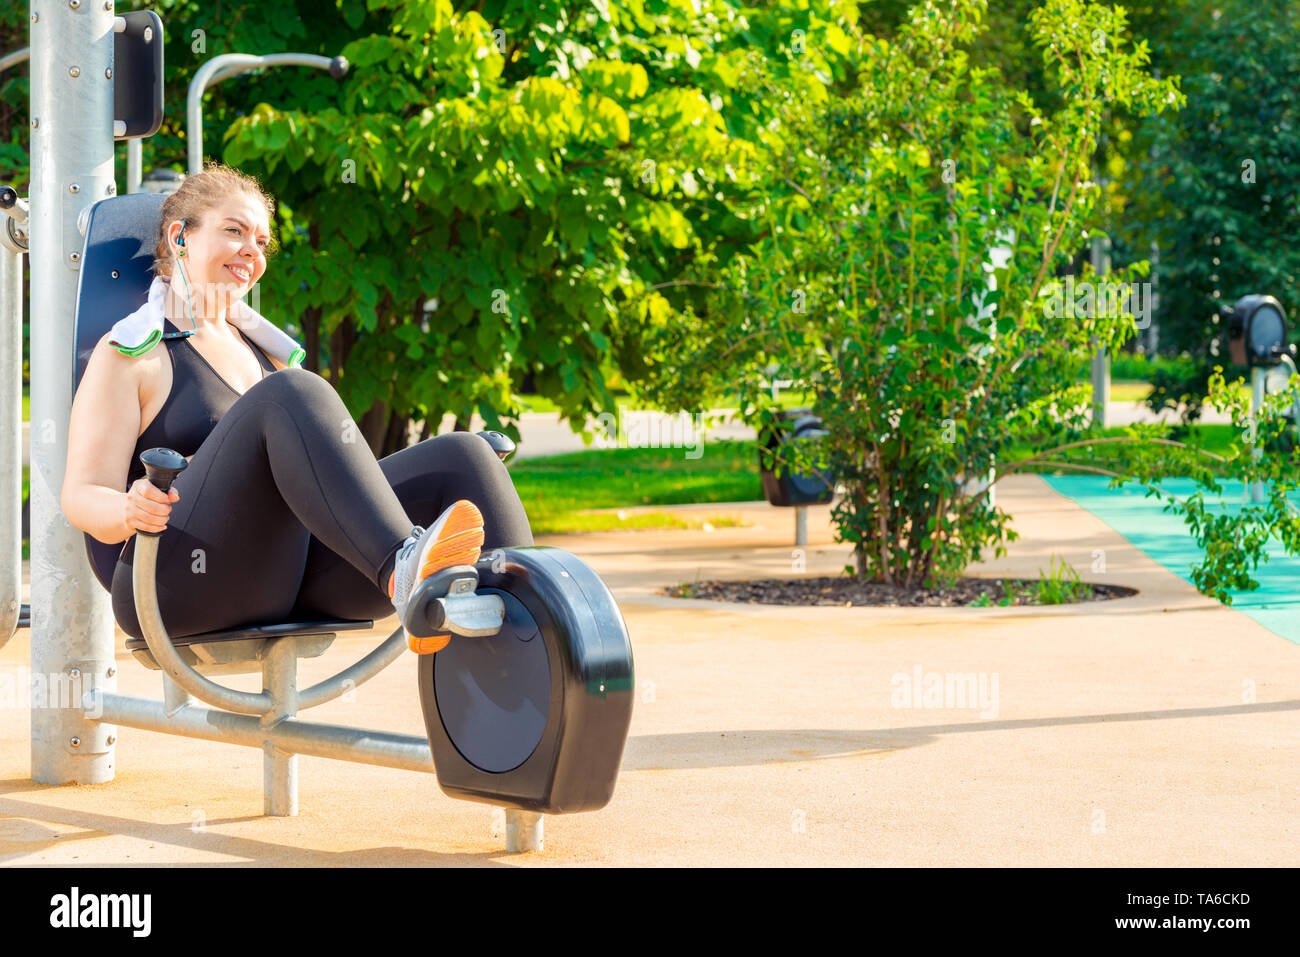 active oversized woman doing exercise on a stationary bike in a city park Stock Photo